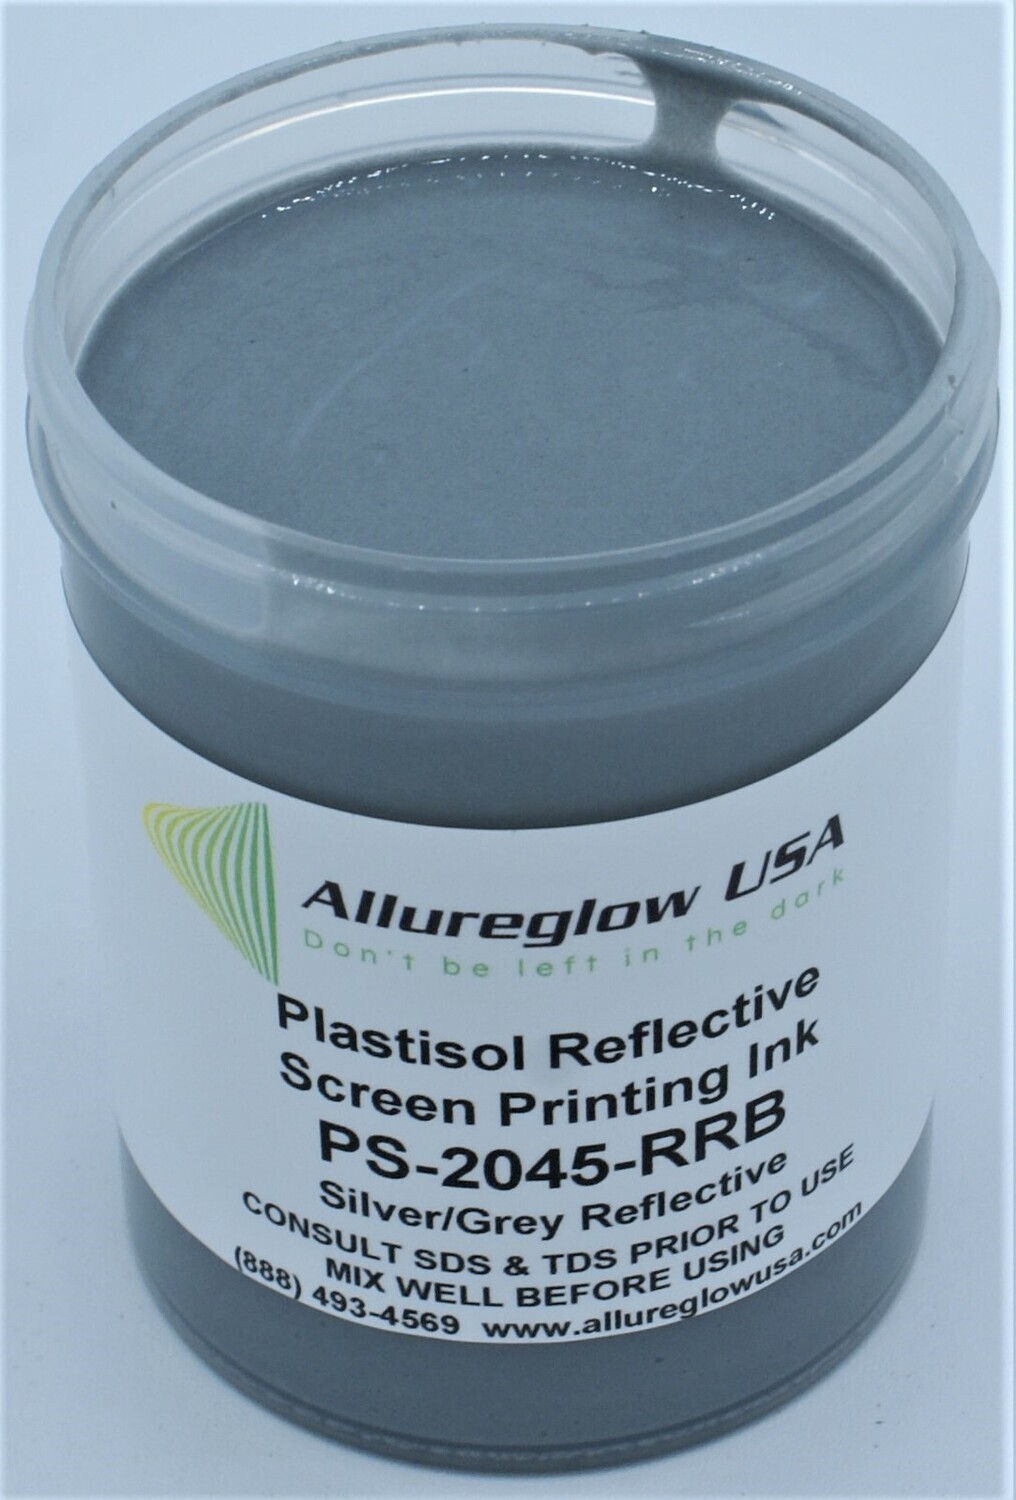 PS-2045-RRB-GL PLASTISOL SILVER/GRAY REFLECTIVE SCREEN PRINTING INK GALLON